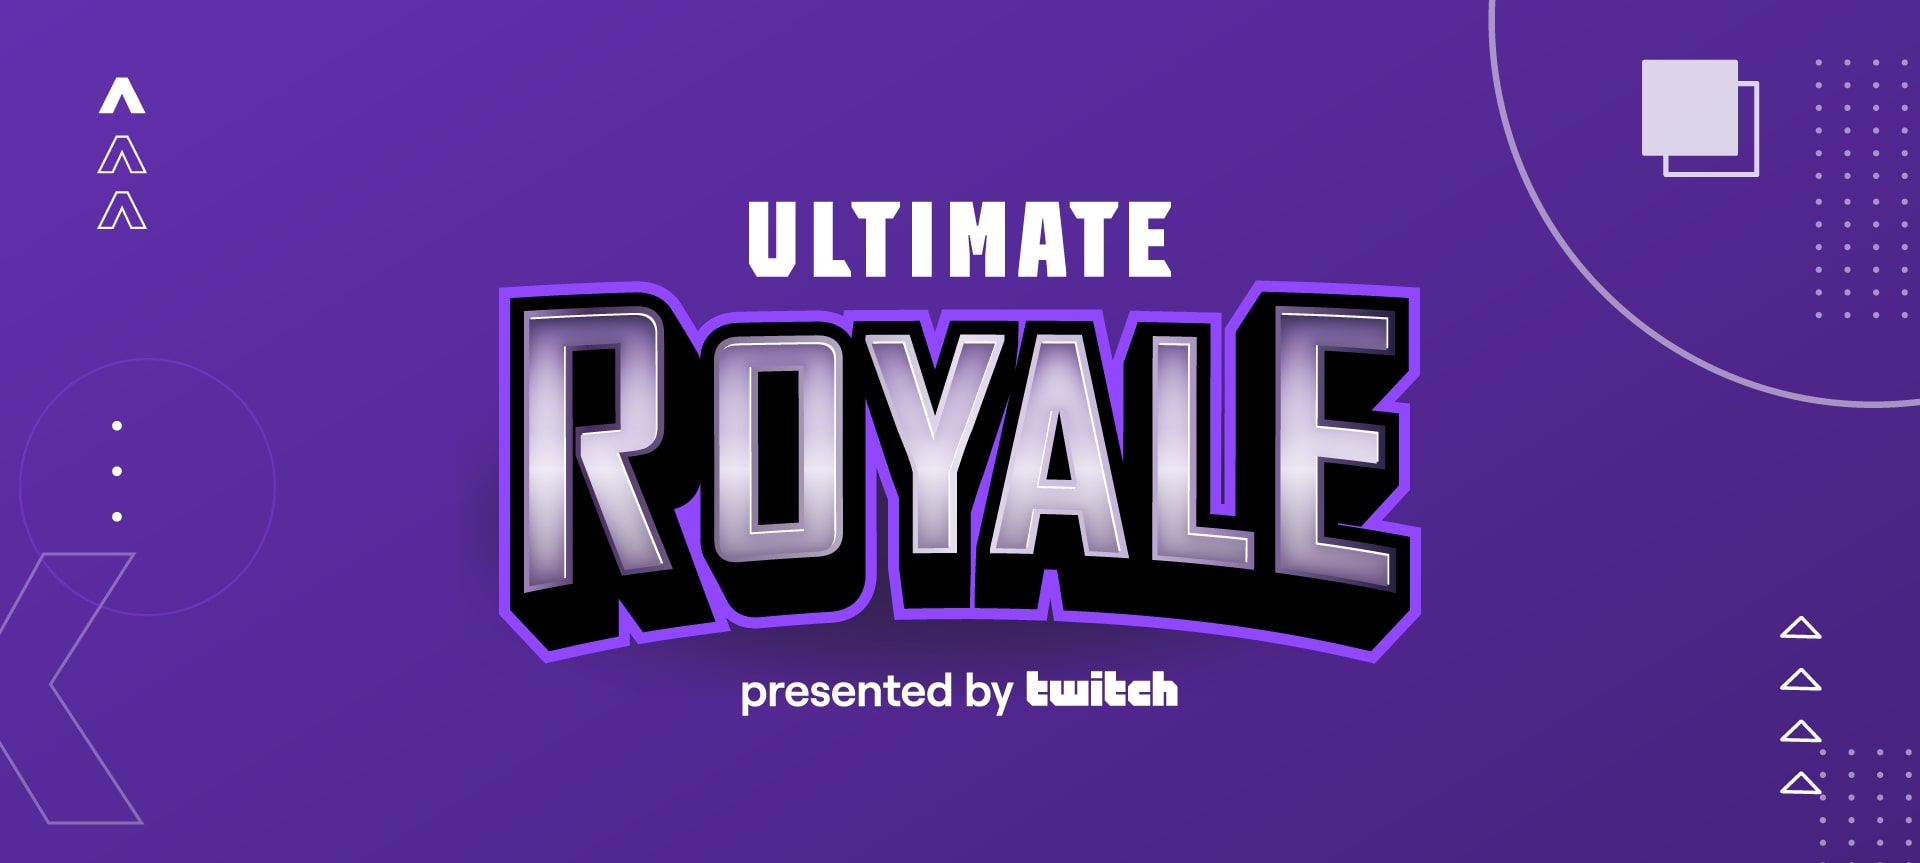 Twitch Ultimate Royale - The Gaming Company